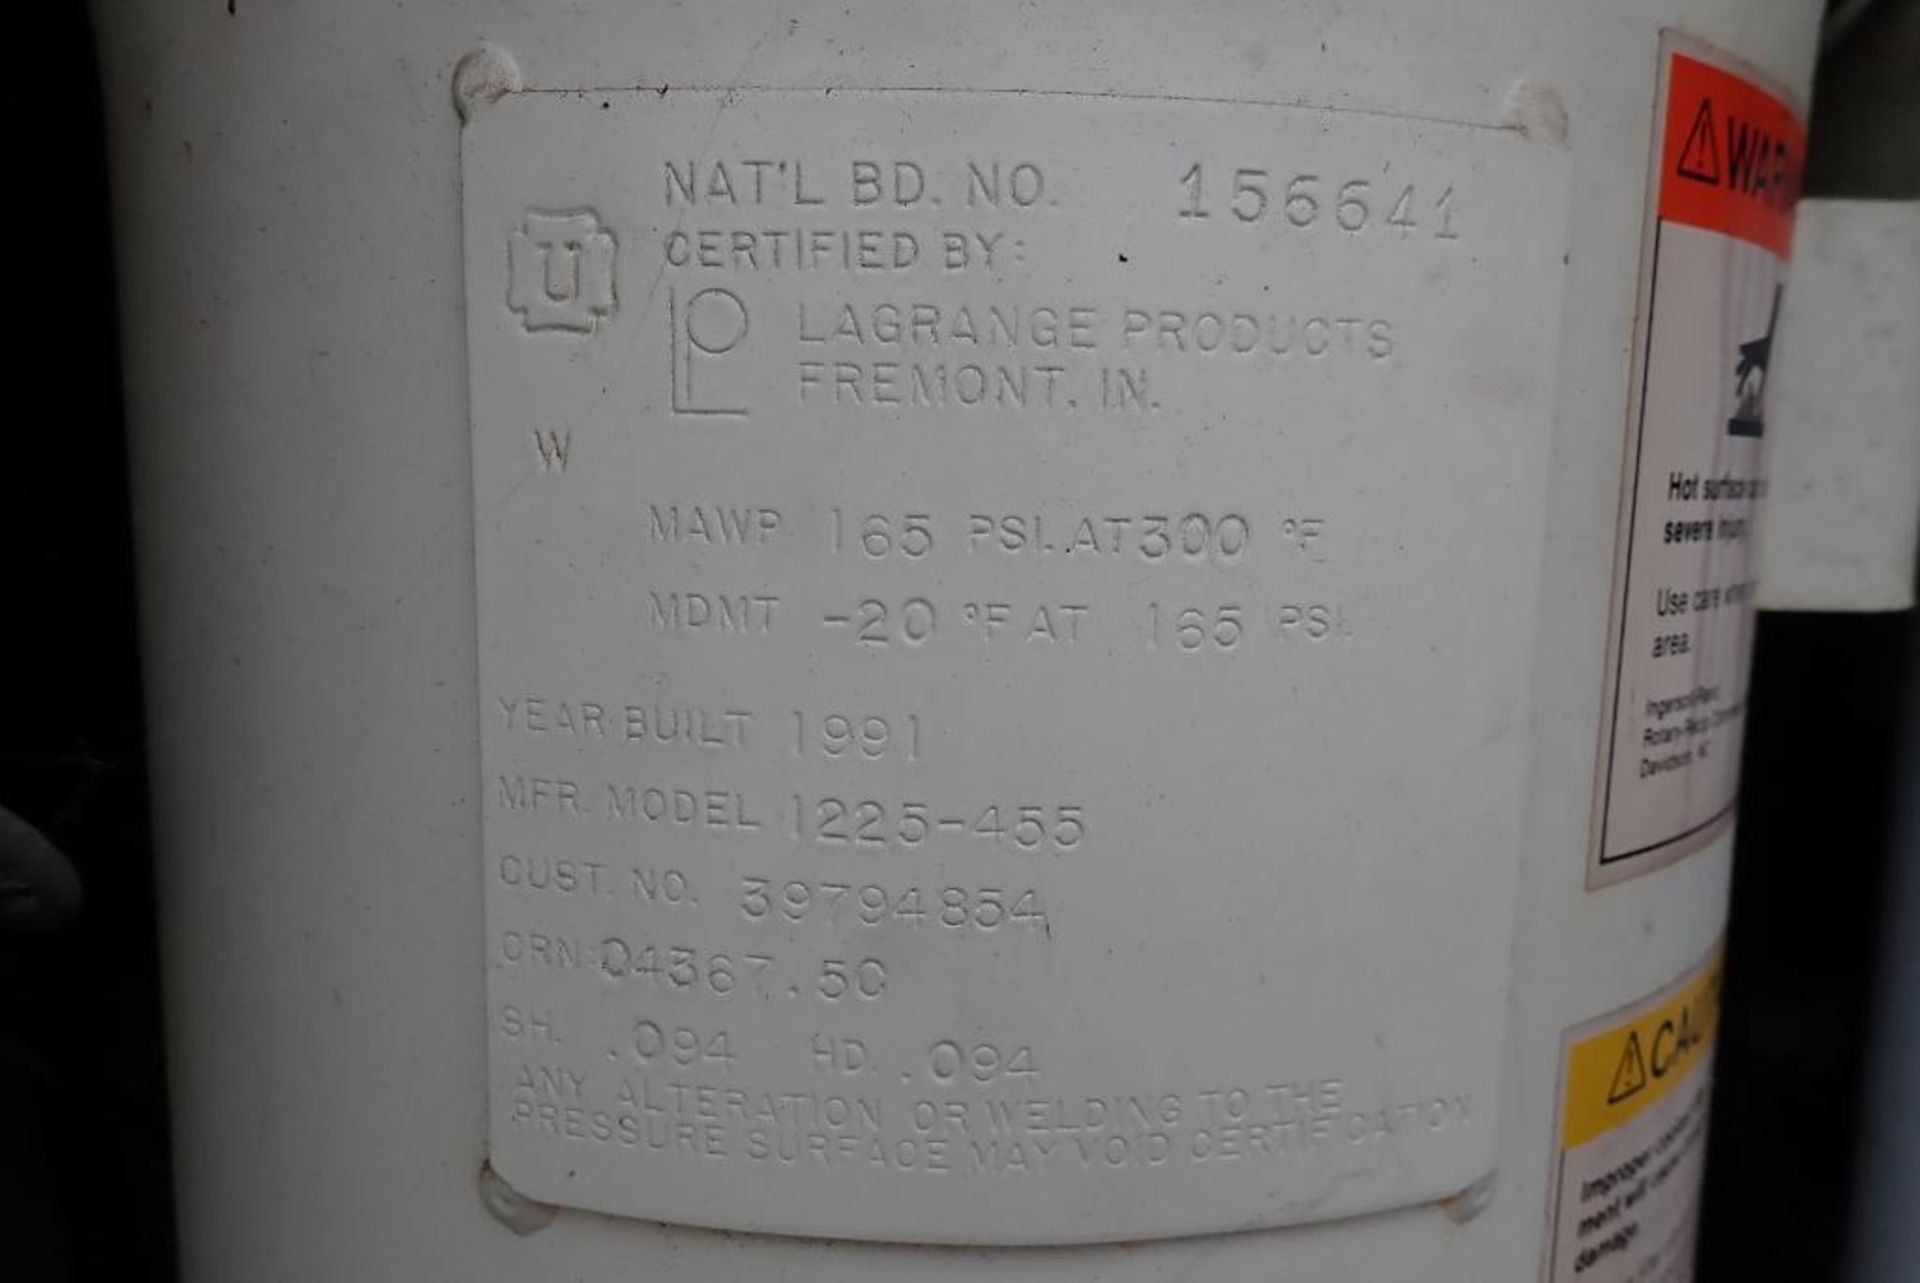 1991 Ingersoll Rand 60 hp air compressor - Image 18 of 25